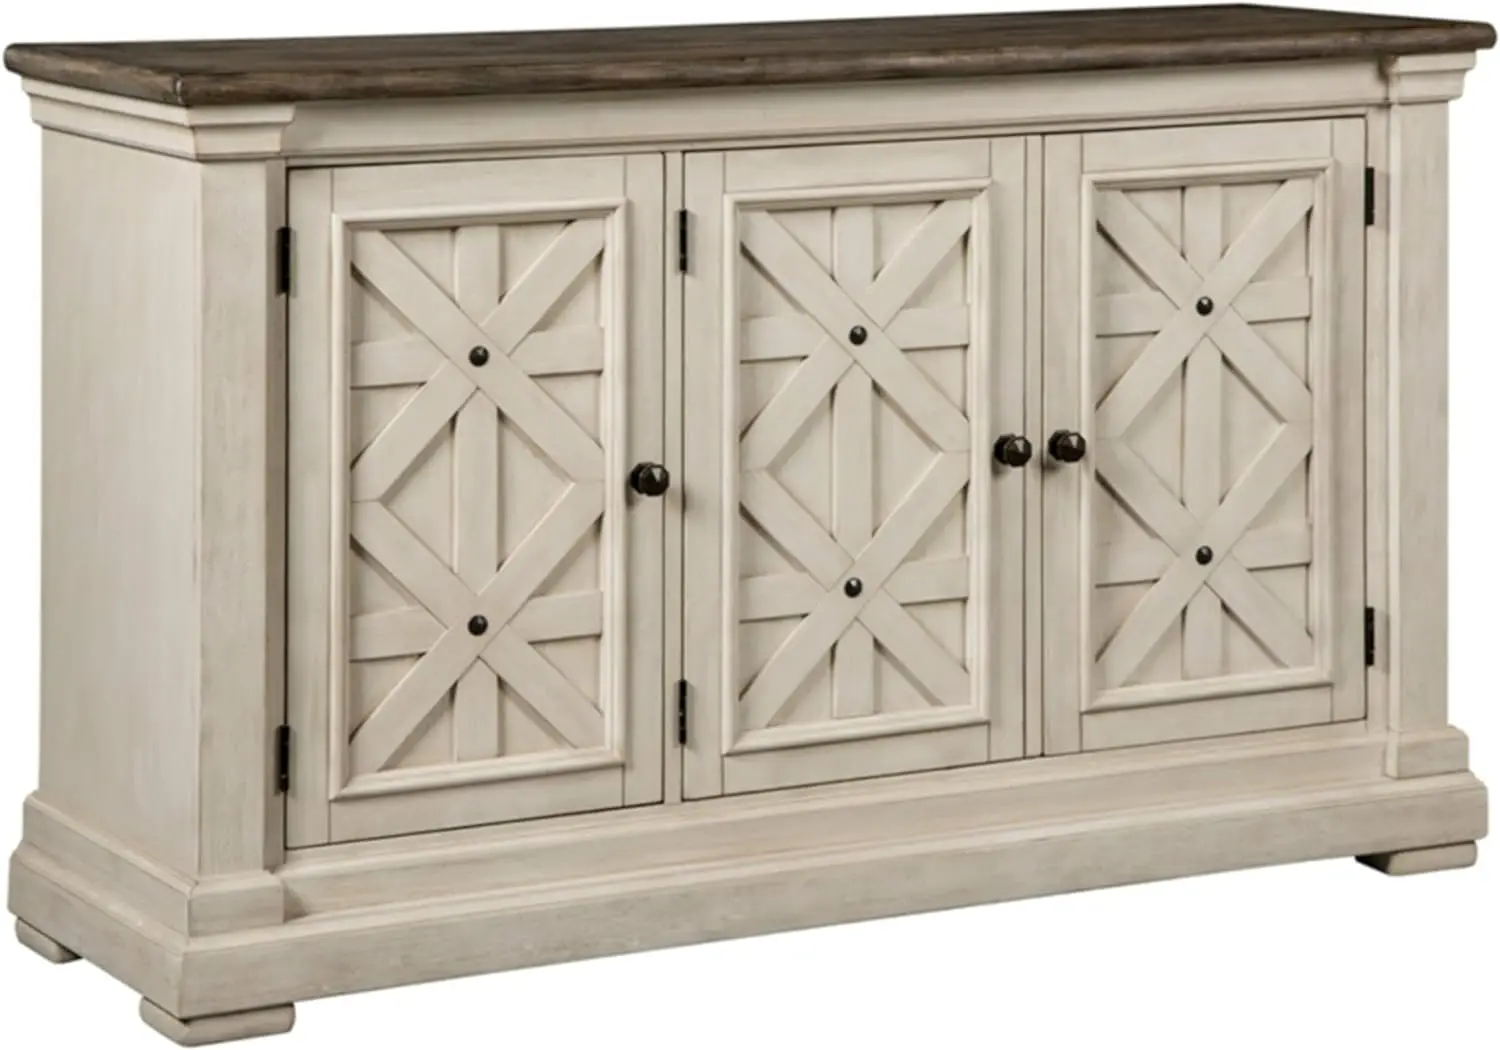 

Signature Design by Ashley Bolanburg French Country Dining Room Server, Two-tone White & Brown